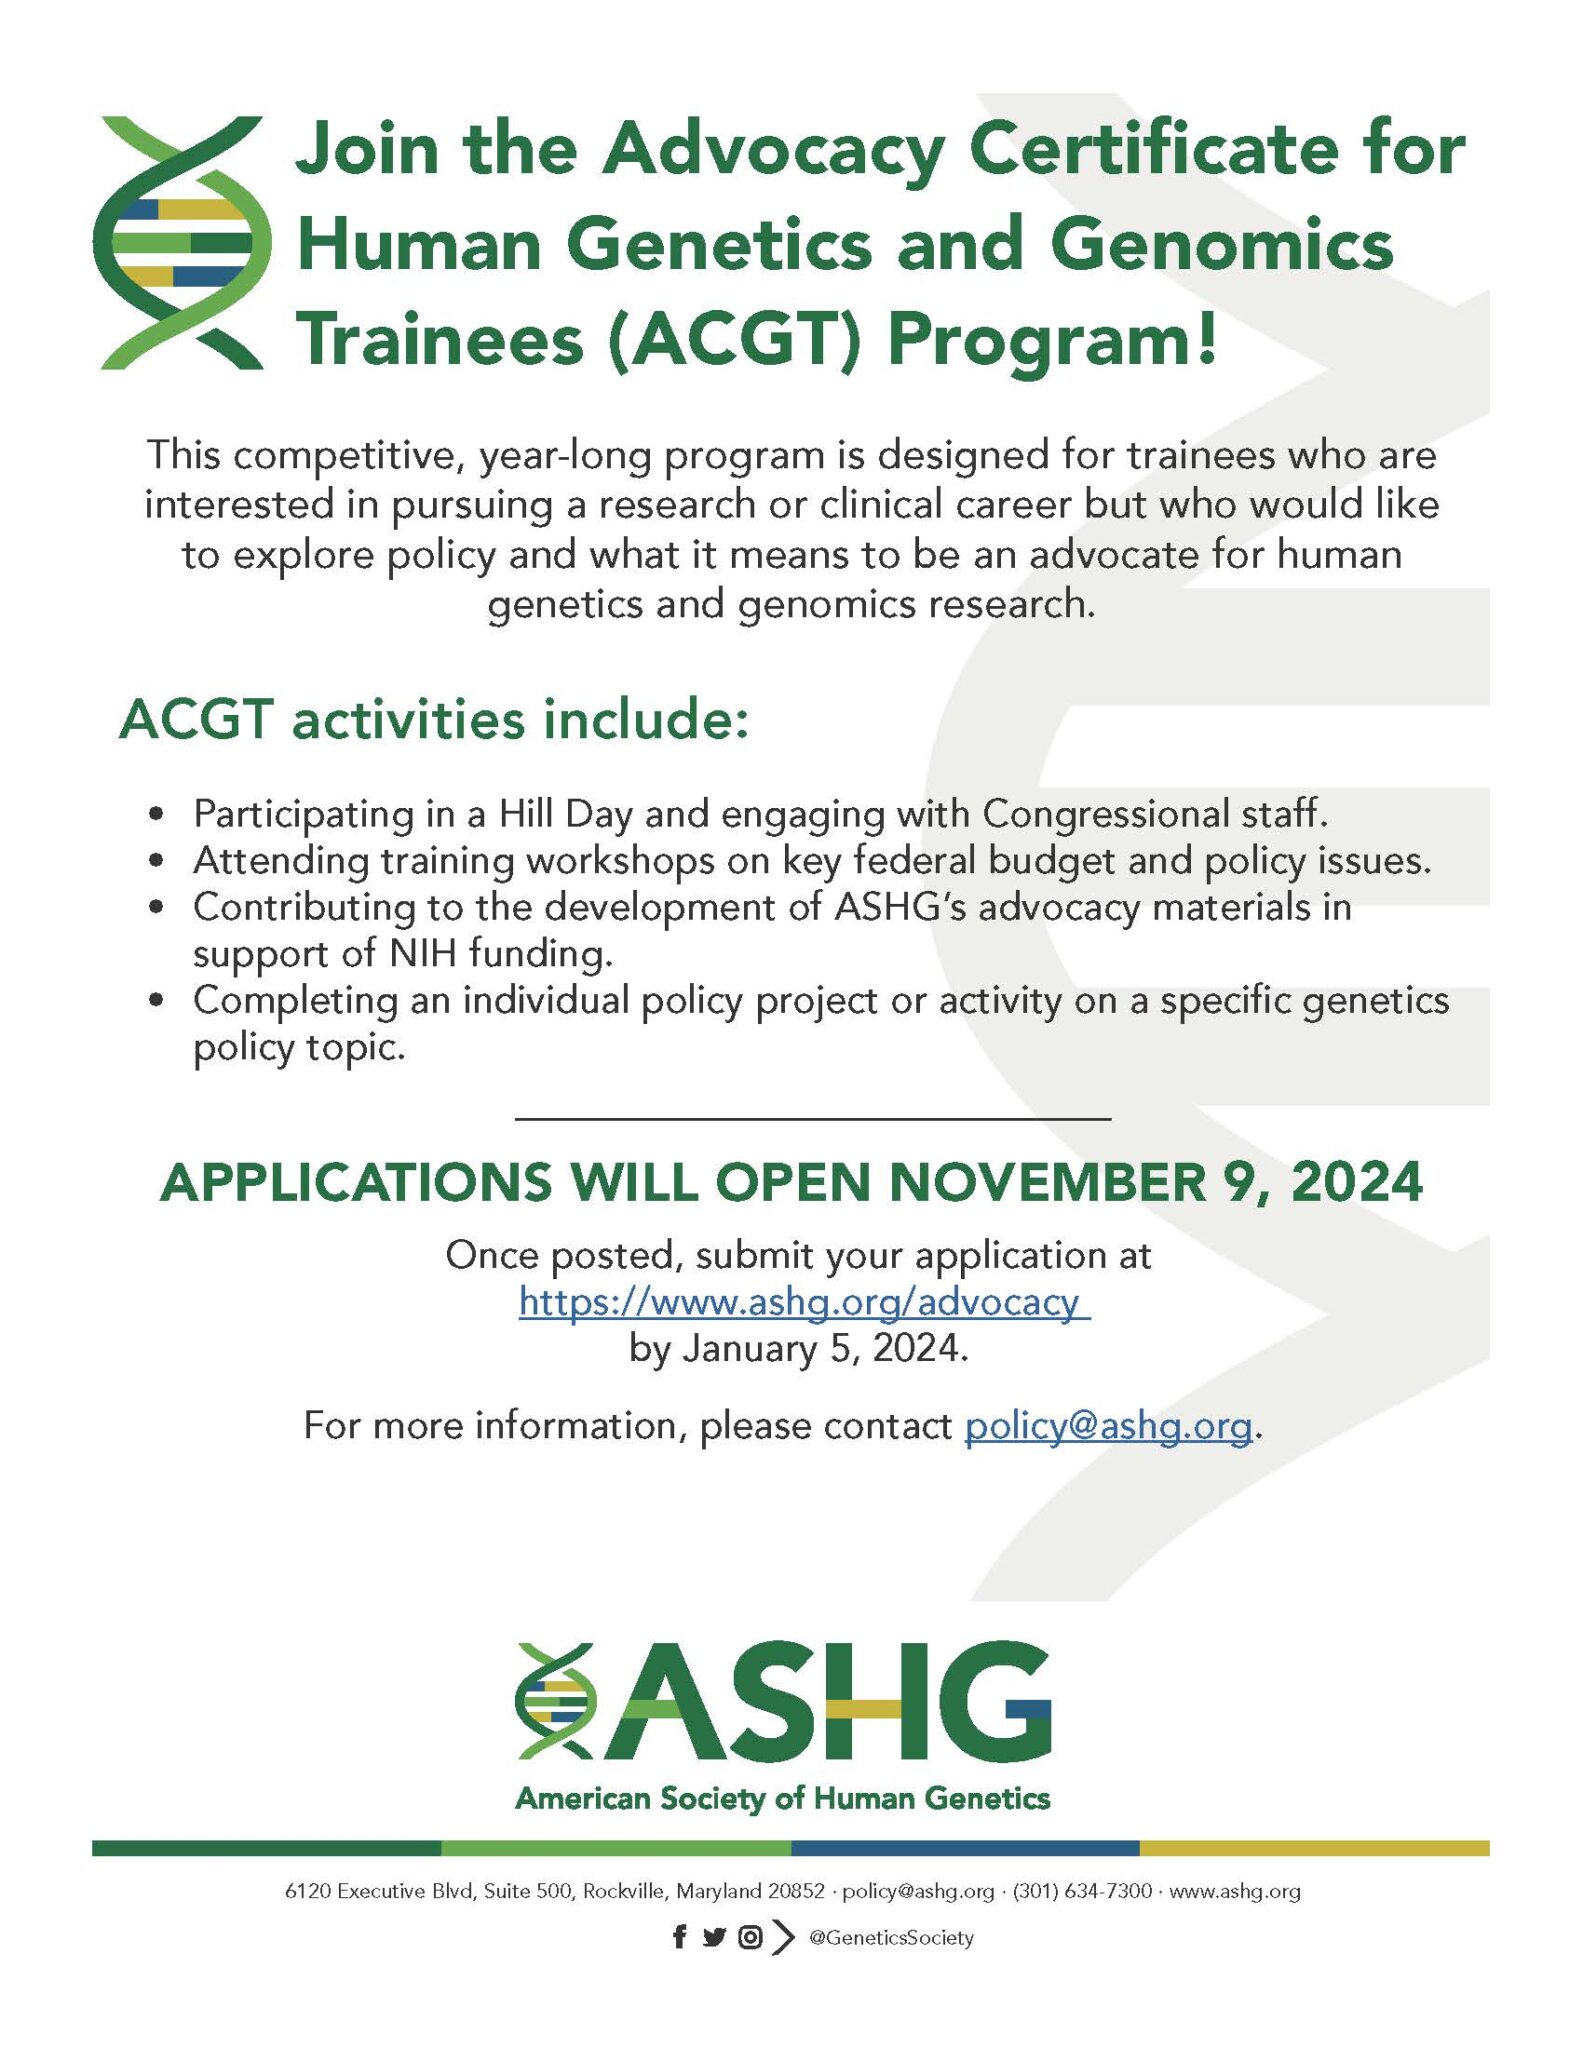 Advocacy Certificate for Human and Genomics Trainees ASHG